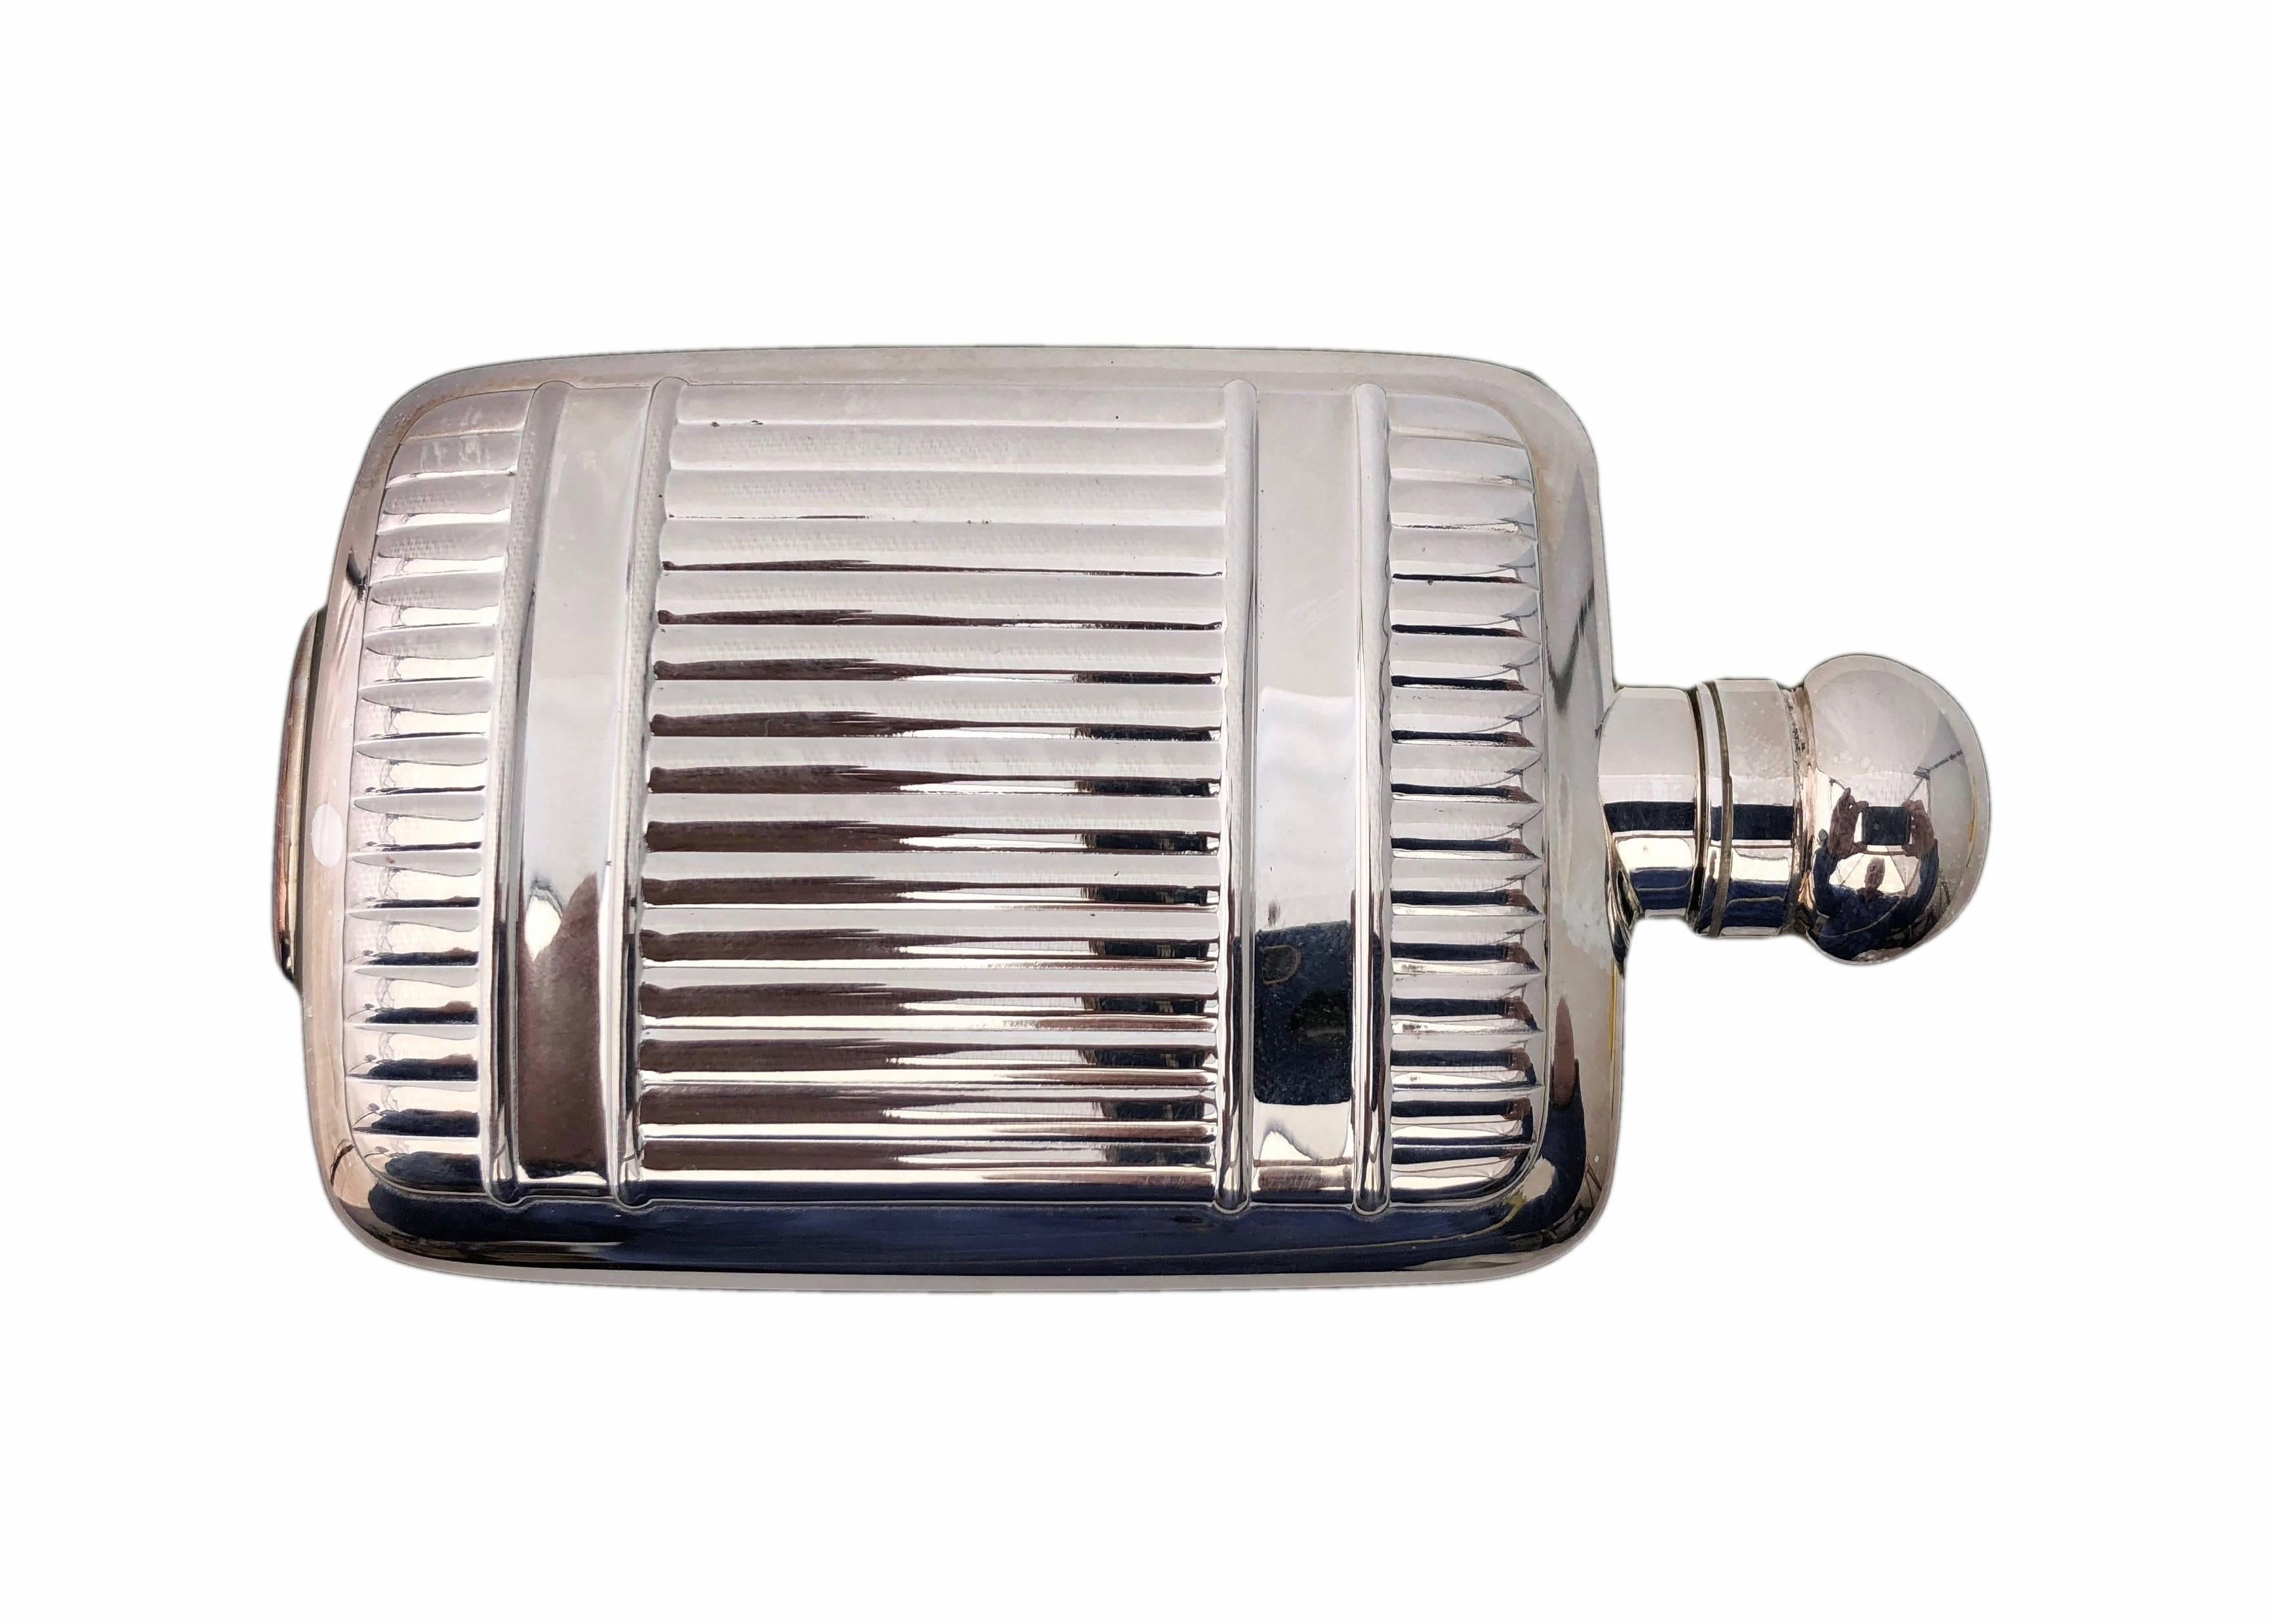 Art Nouveau Christofle Plated Silver Whisky Flask, Model Aria, Late 1900s For Sale